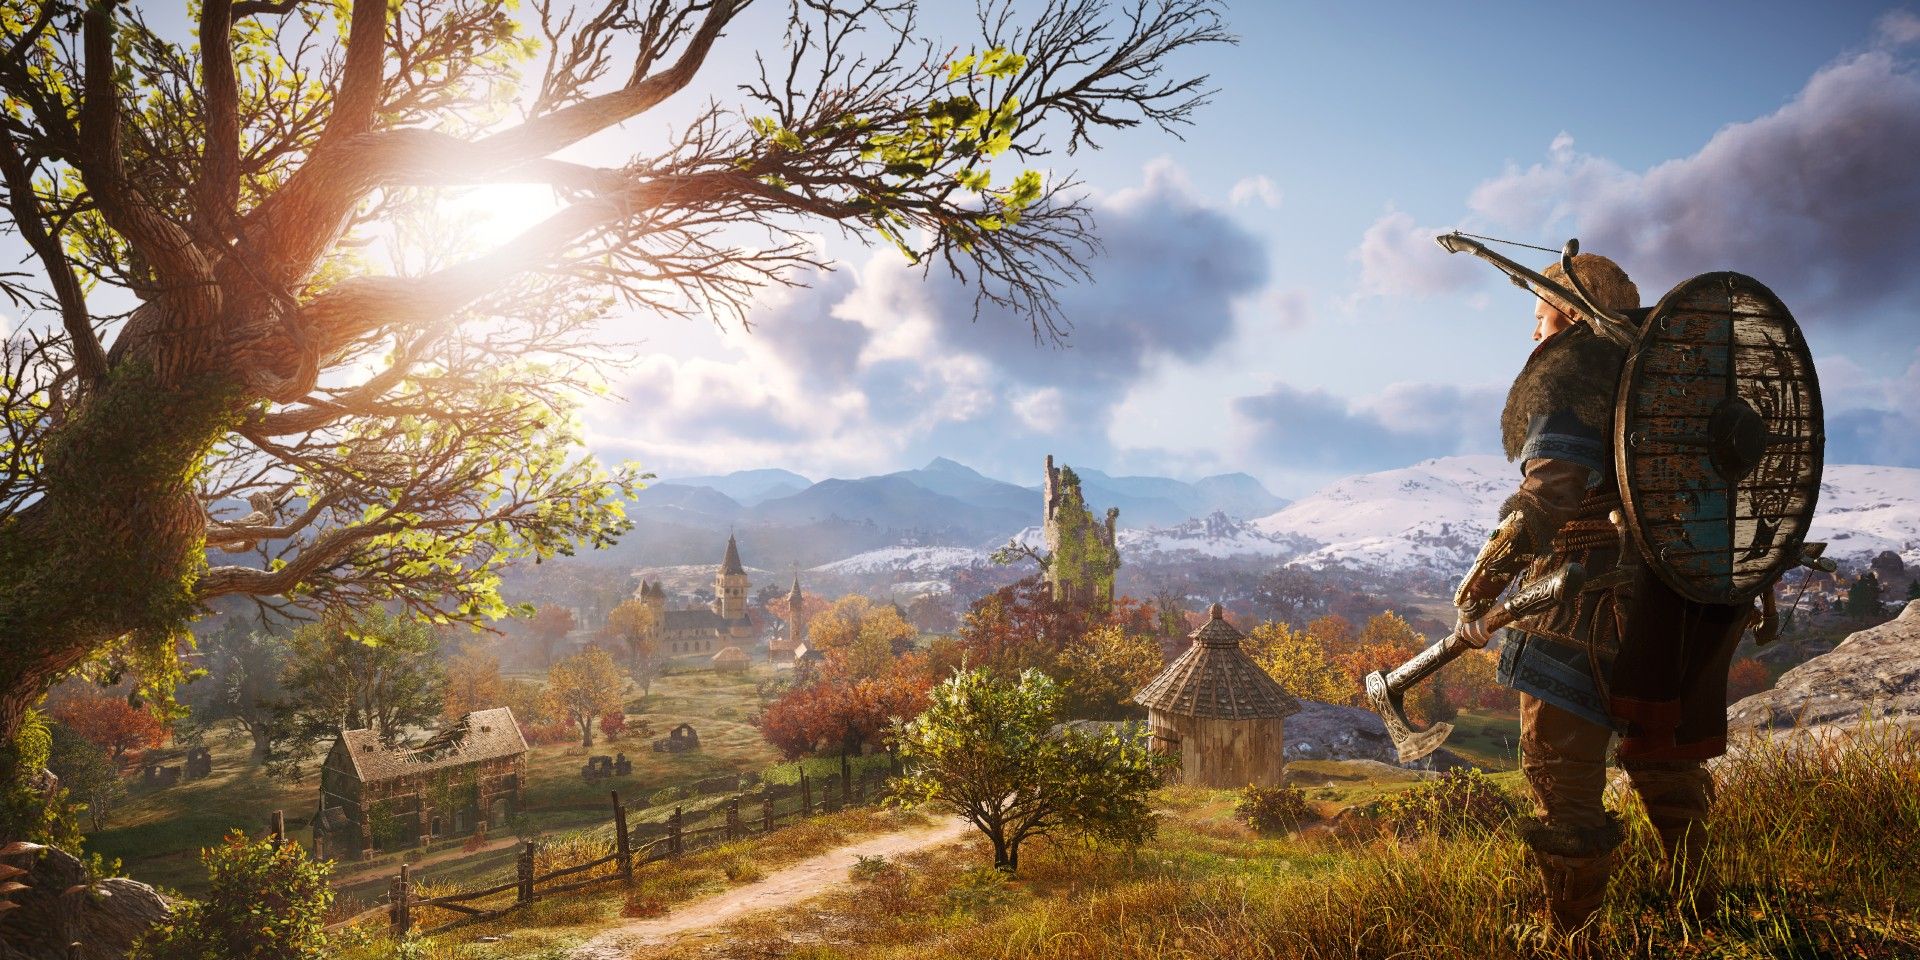 Screenshot from Assassin's Creed Valhalla